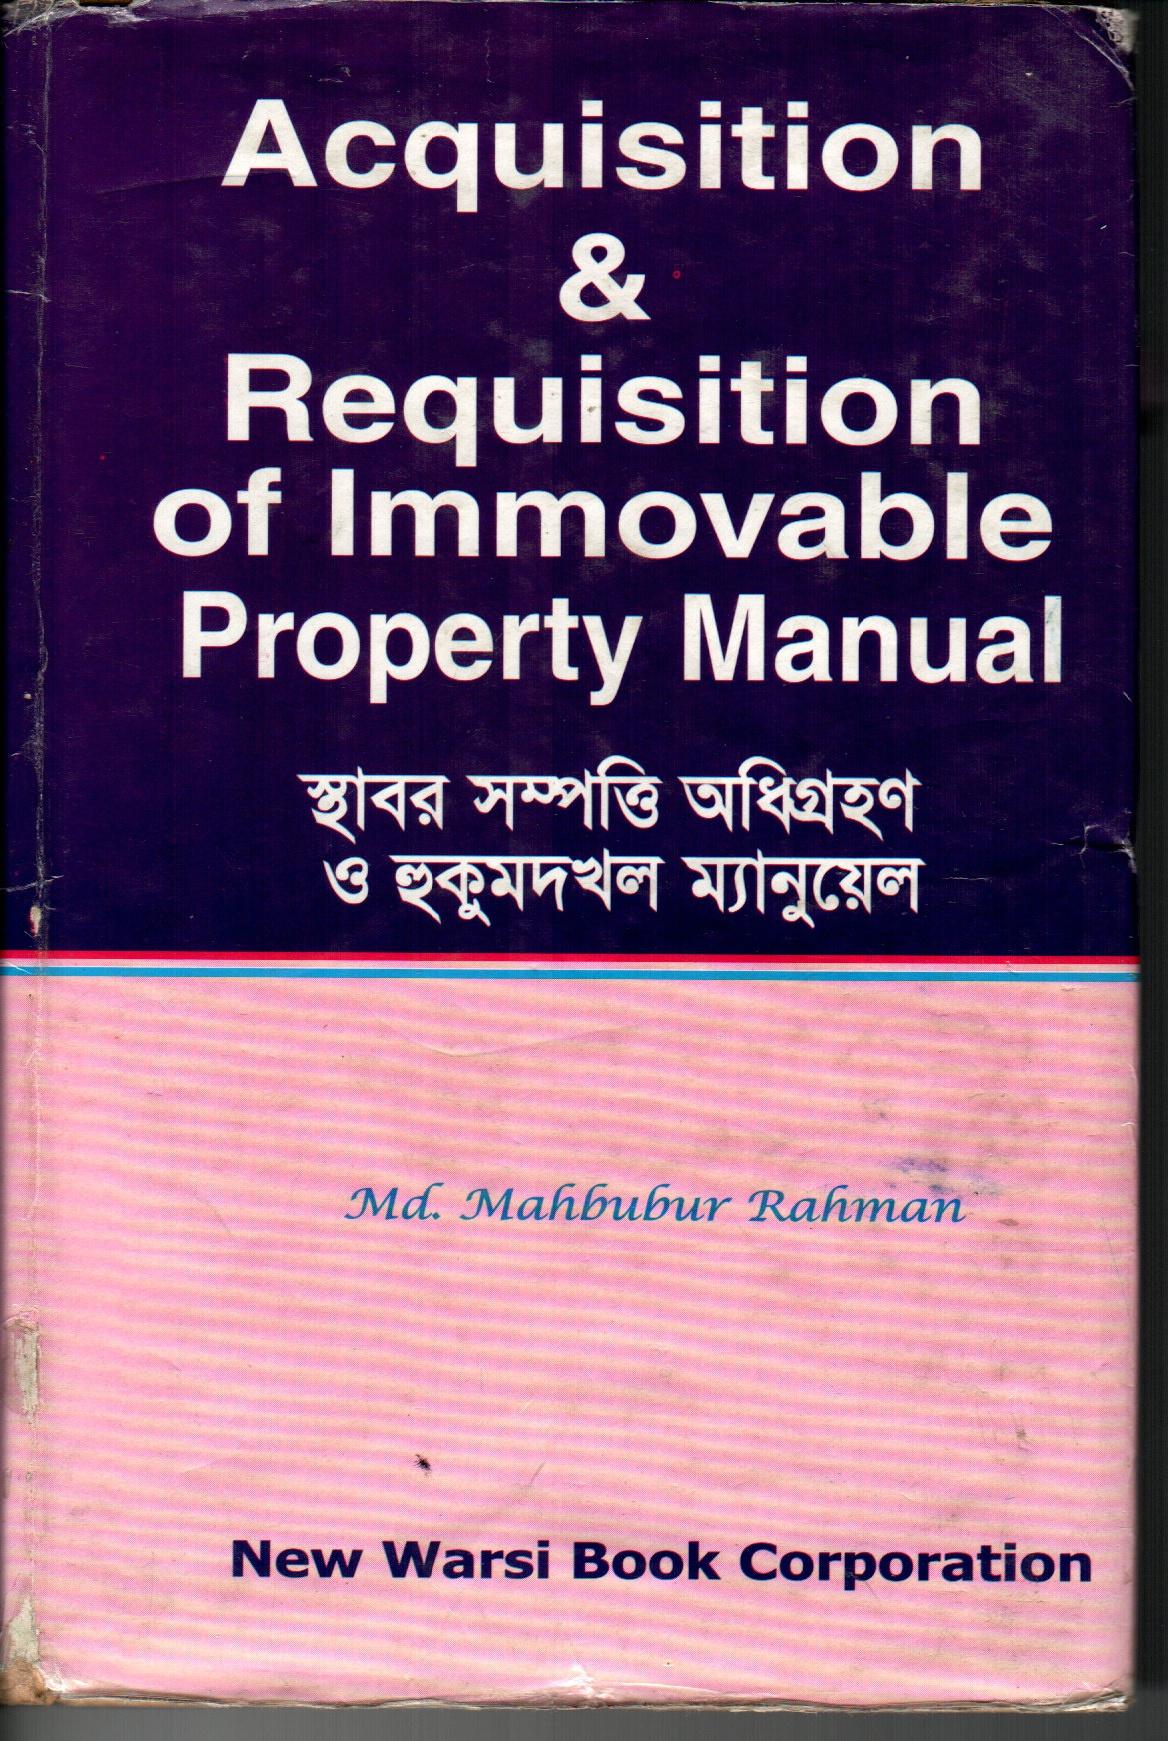 Acquisition & Requisition of Immovable Property Manual